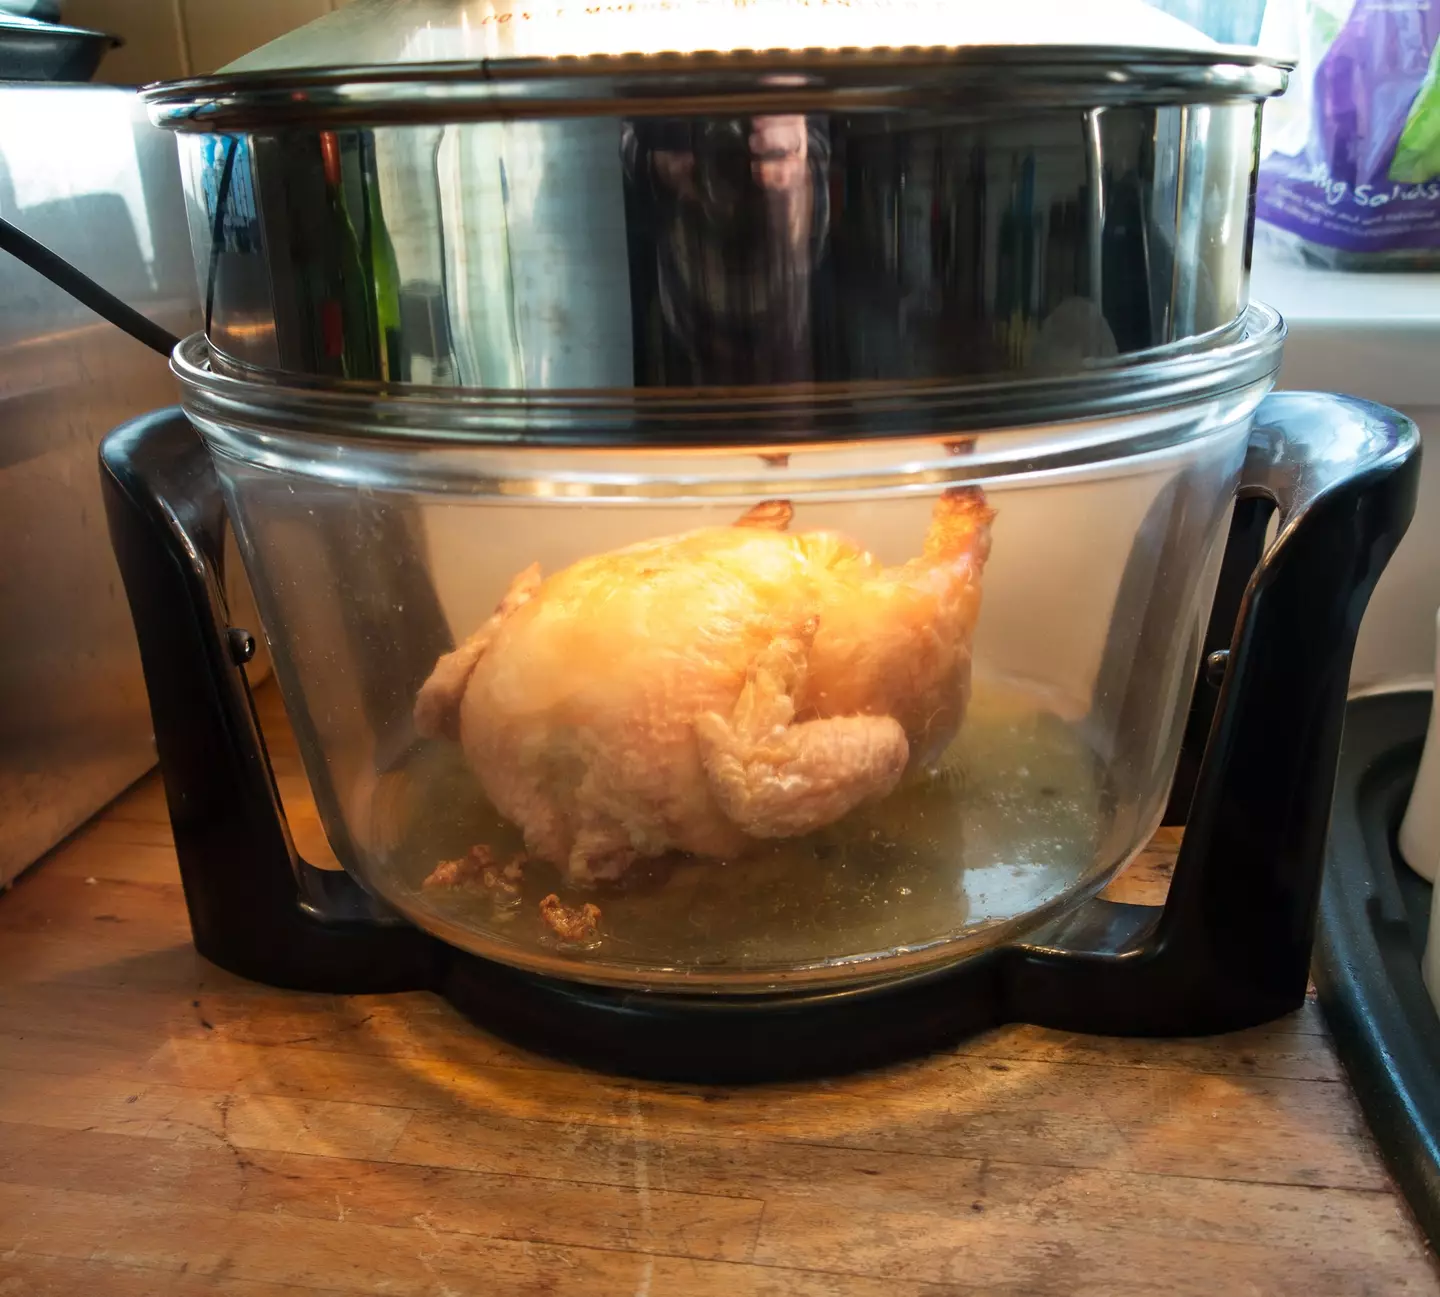 Halogen ovens could be a good alternative if you're struggling to buy an air fryer.